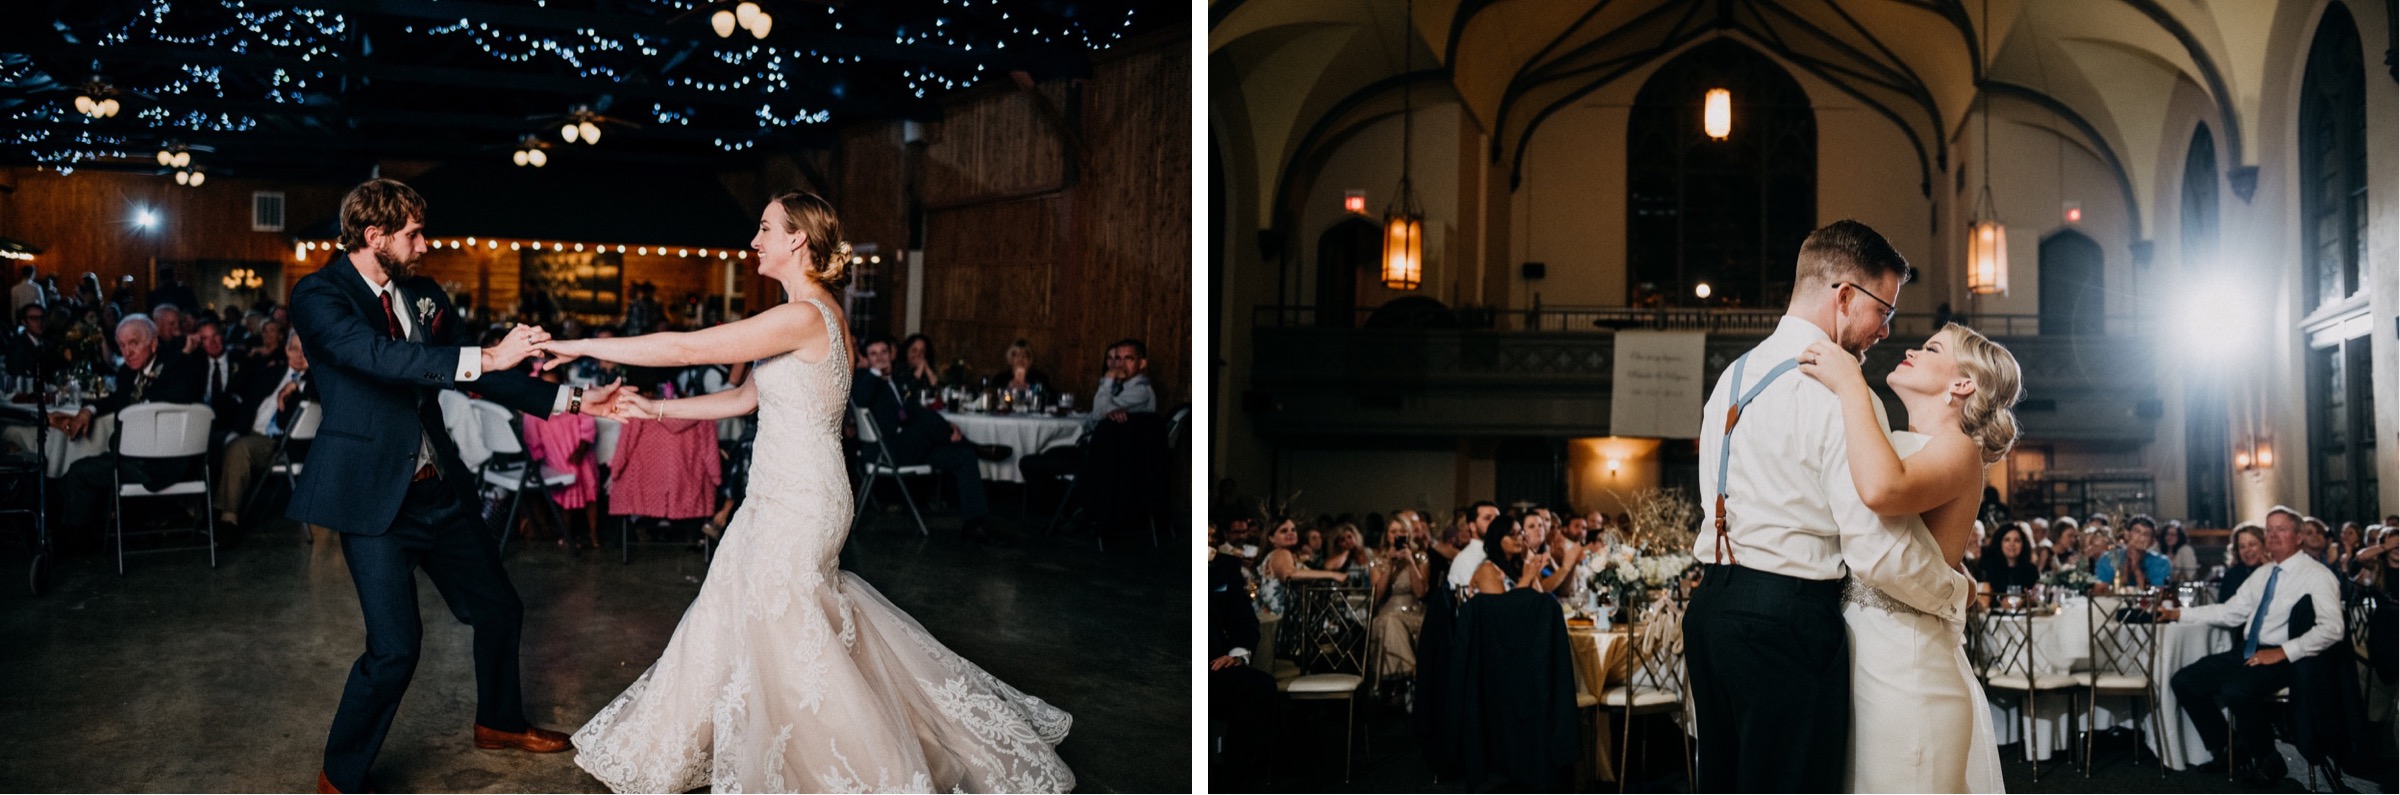 The bride and groom share their first dance during the reception portion of the wedding day timeline